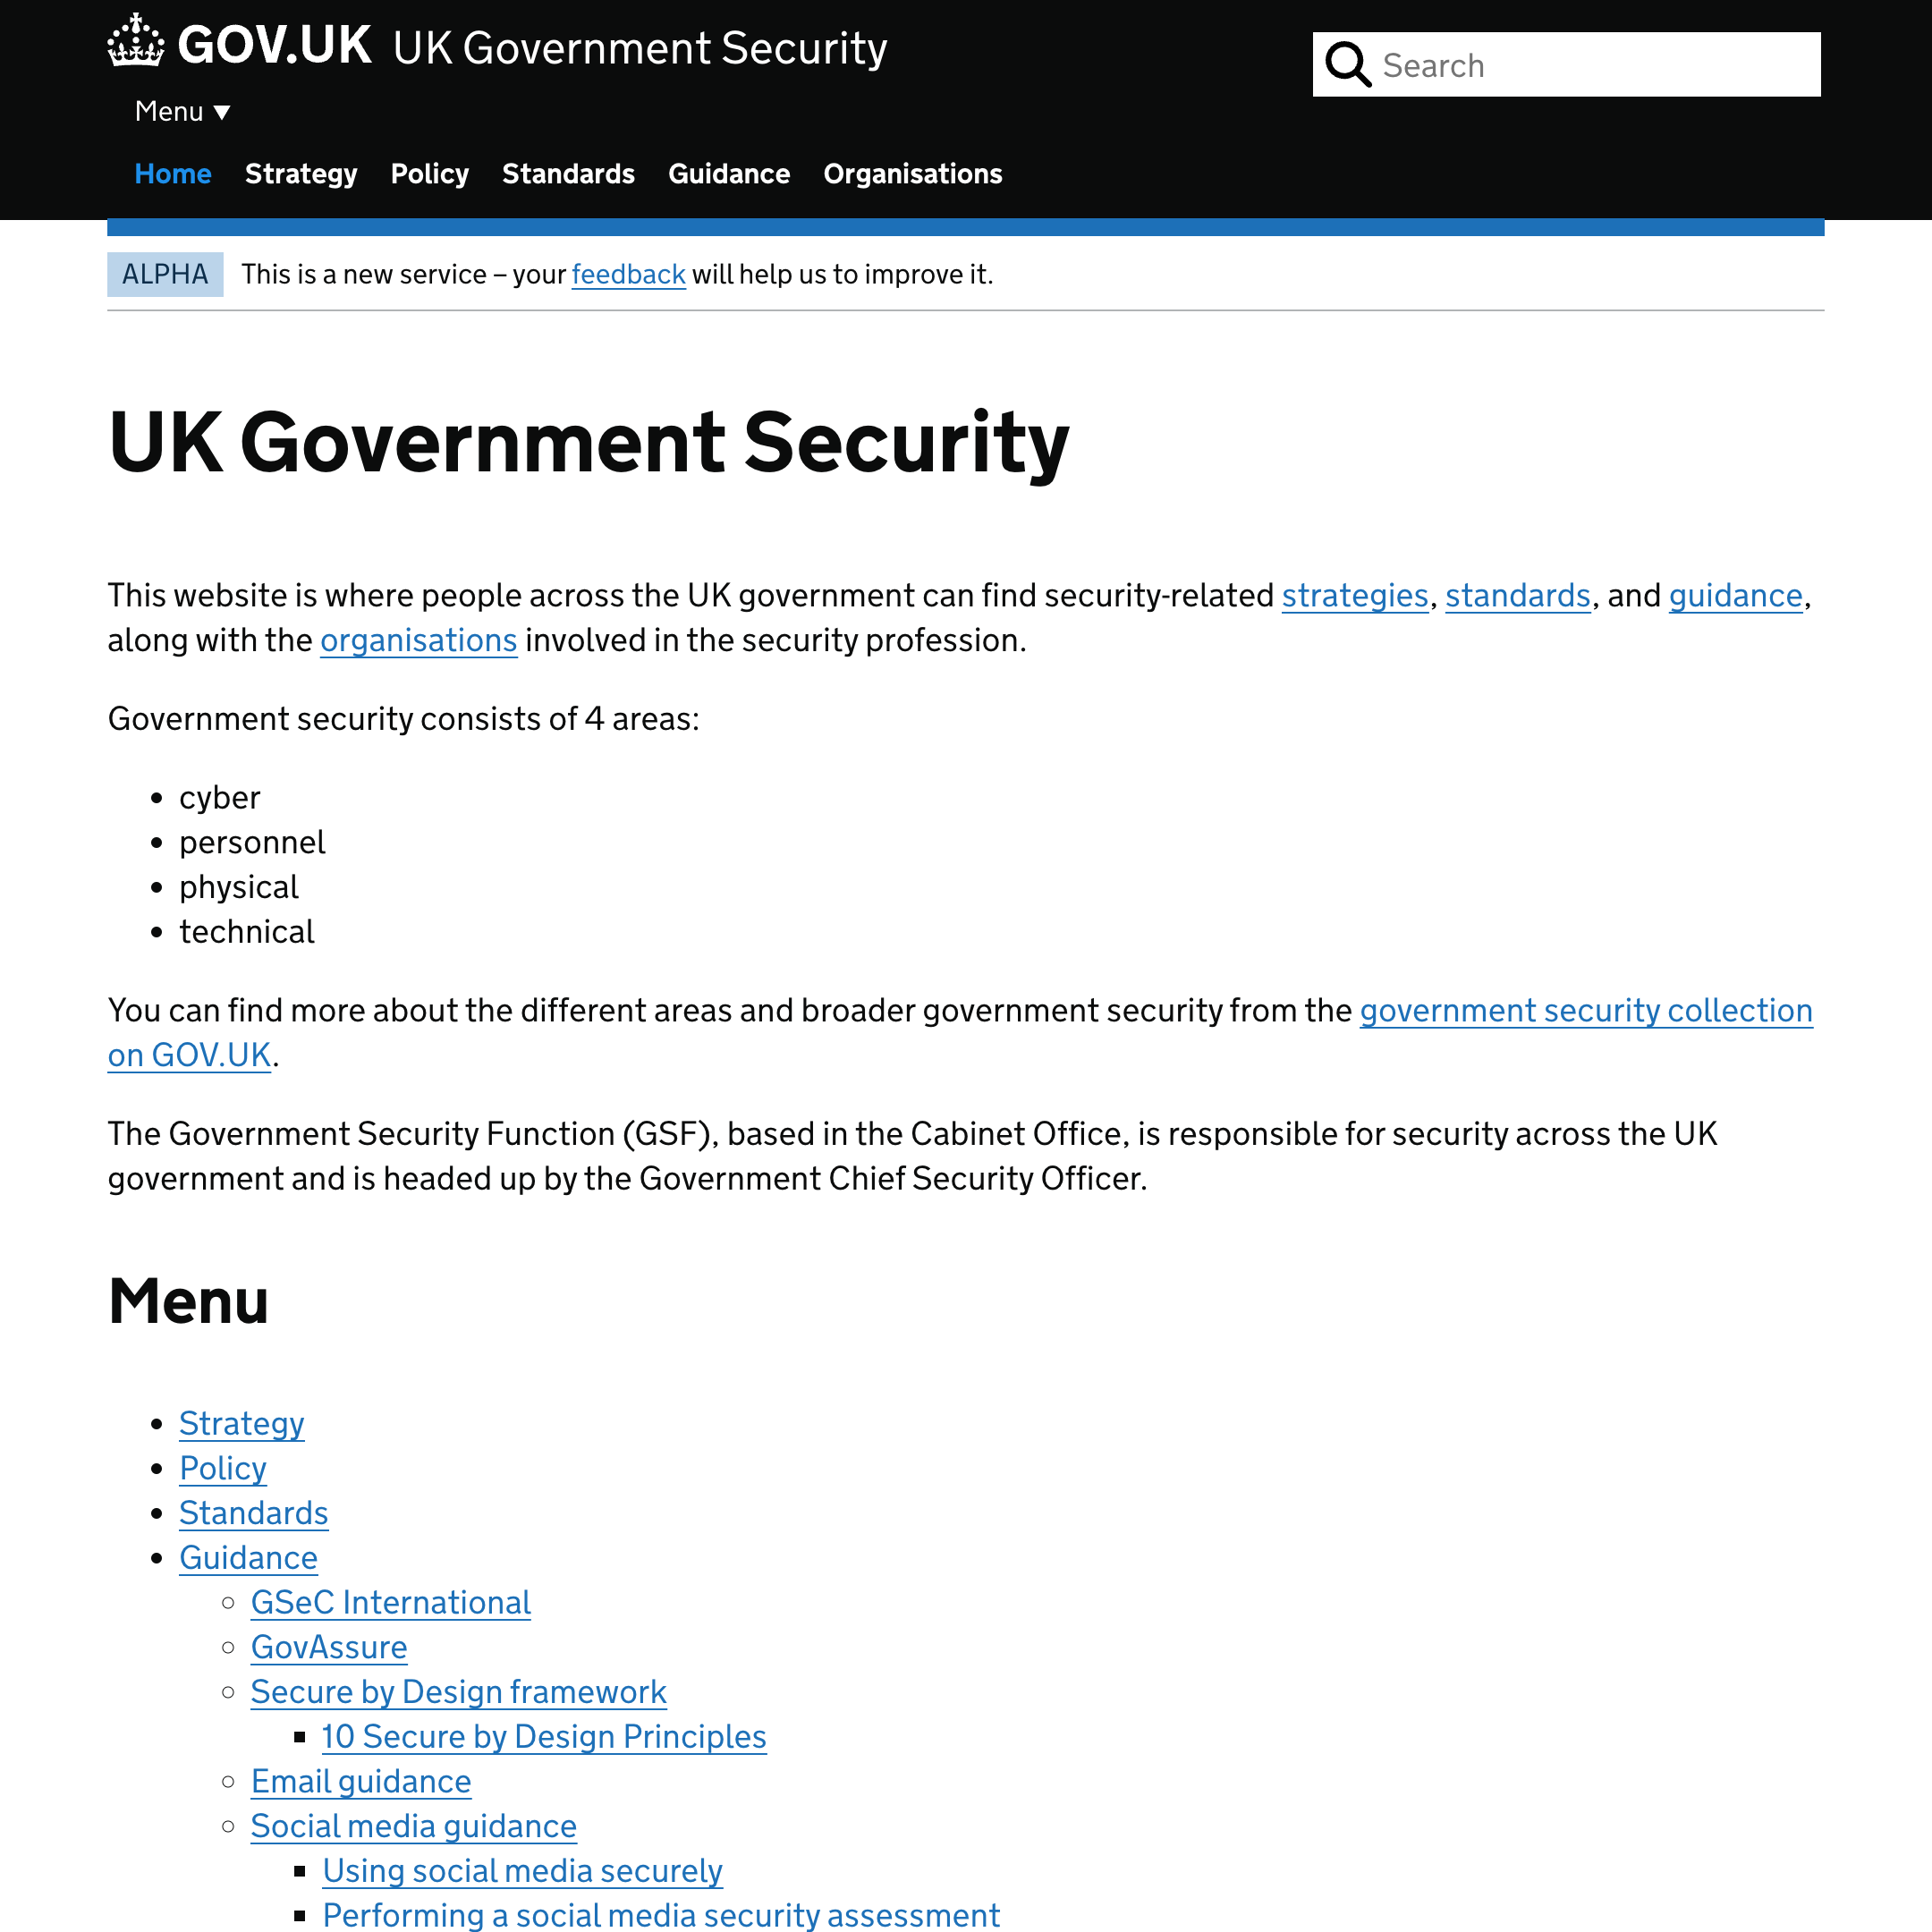 GOV.UK UK Government Security